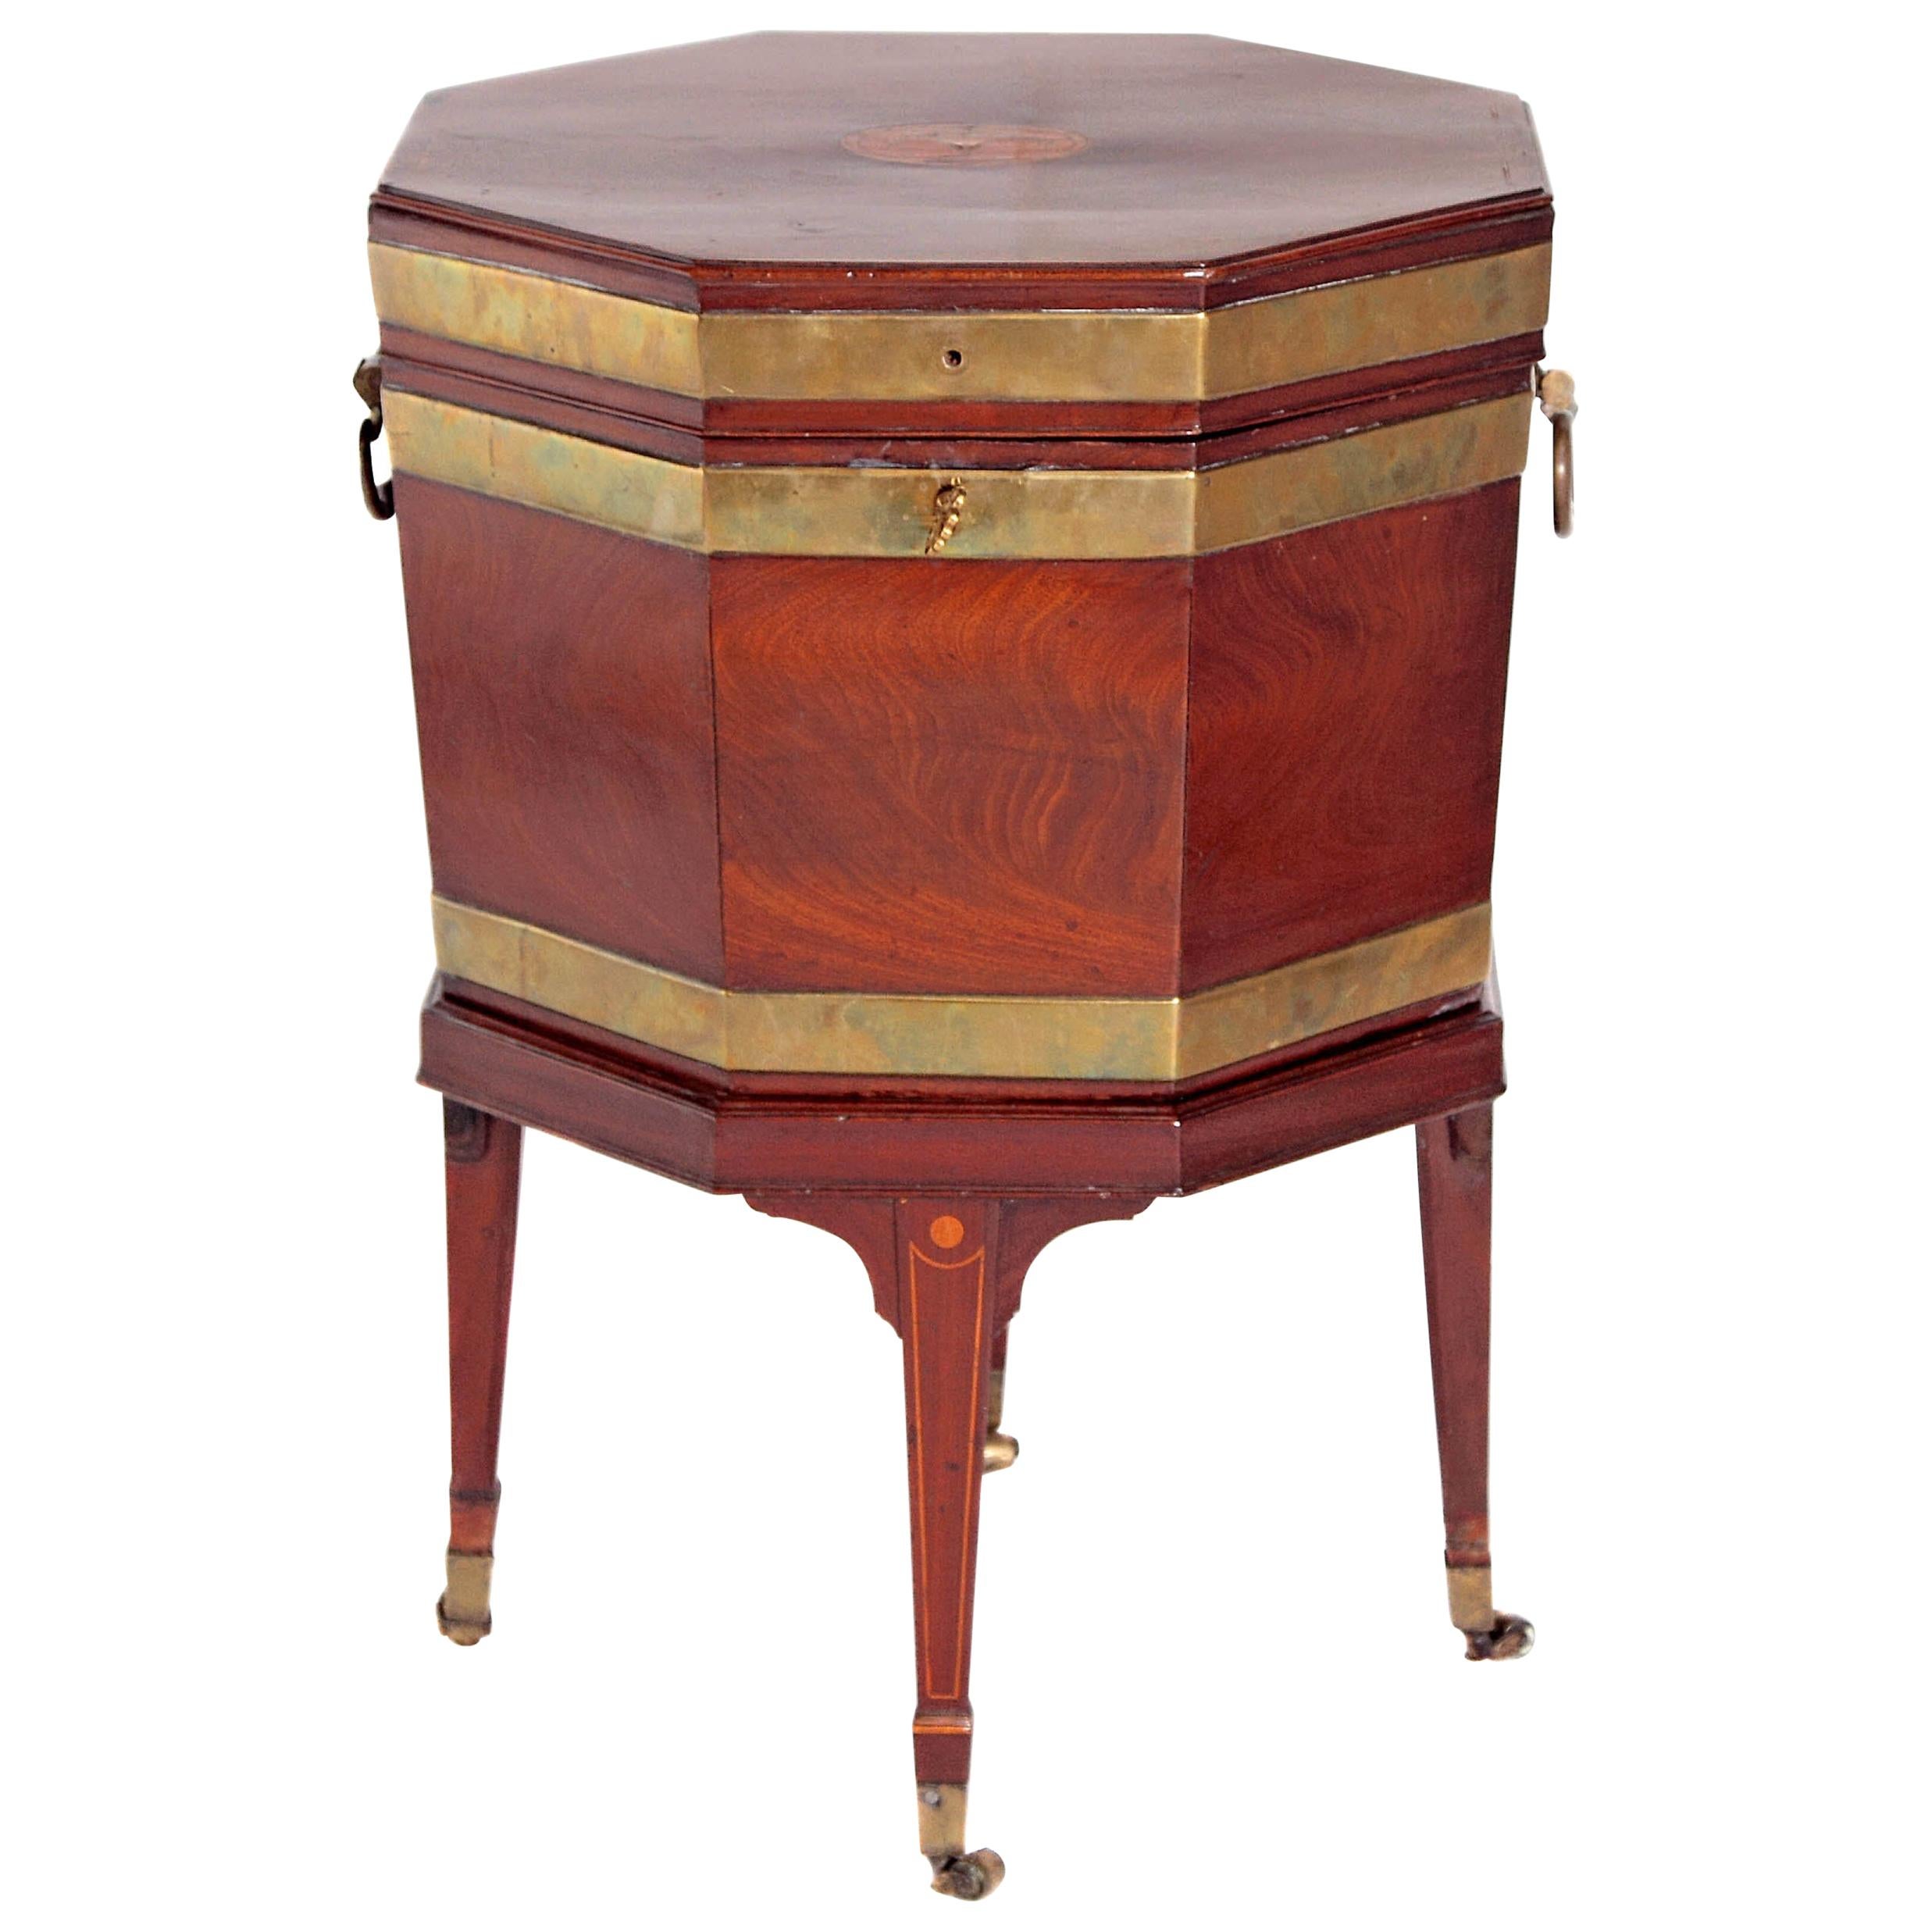 George III Mahogany and Brass Cellarette/Wine Cooler